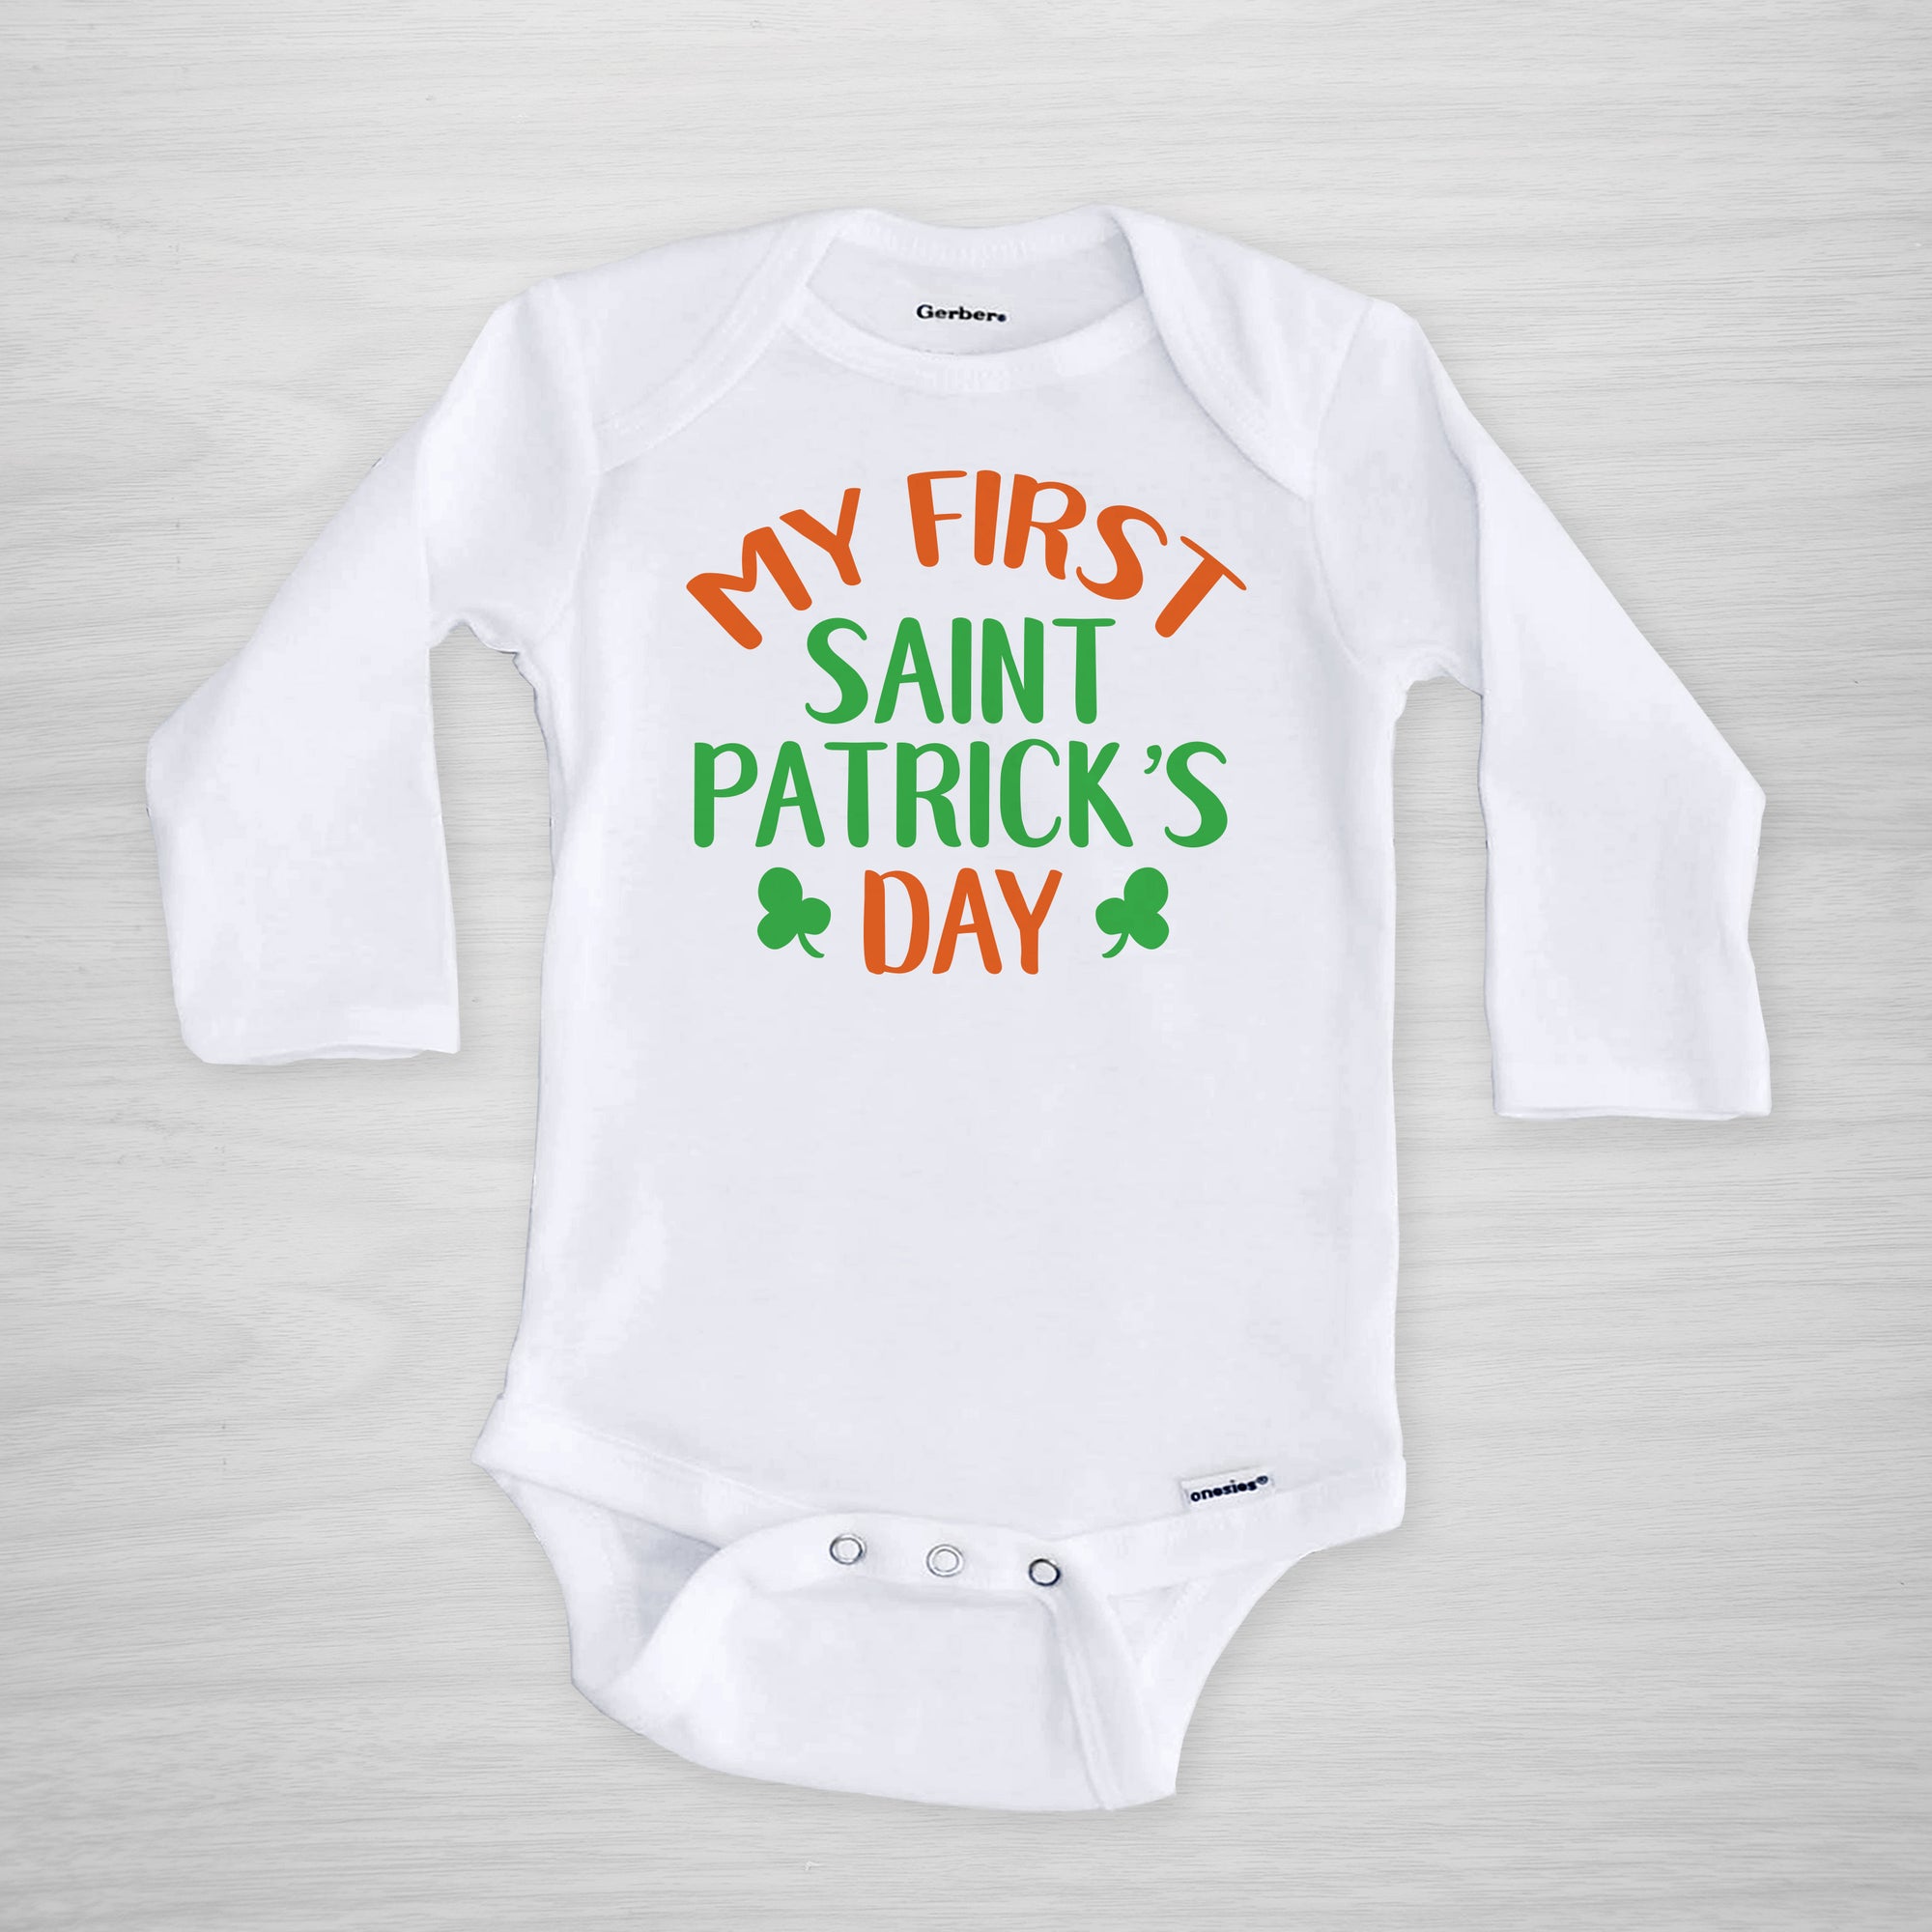 My First Saint Patrick's Day Onesie®, long sleeved